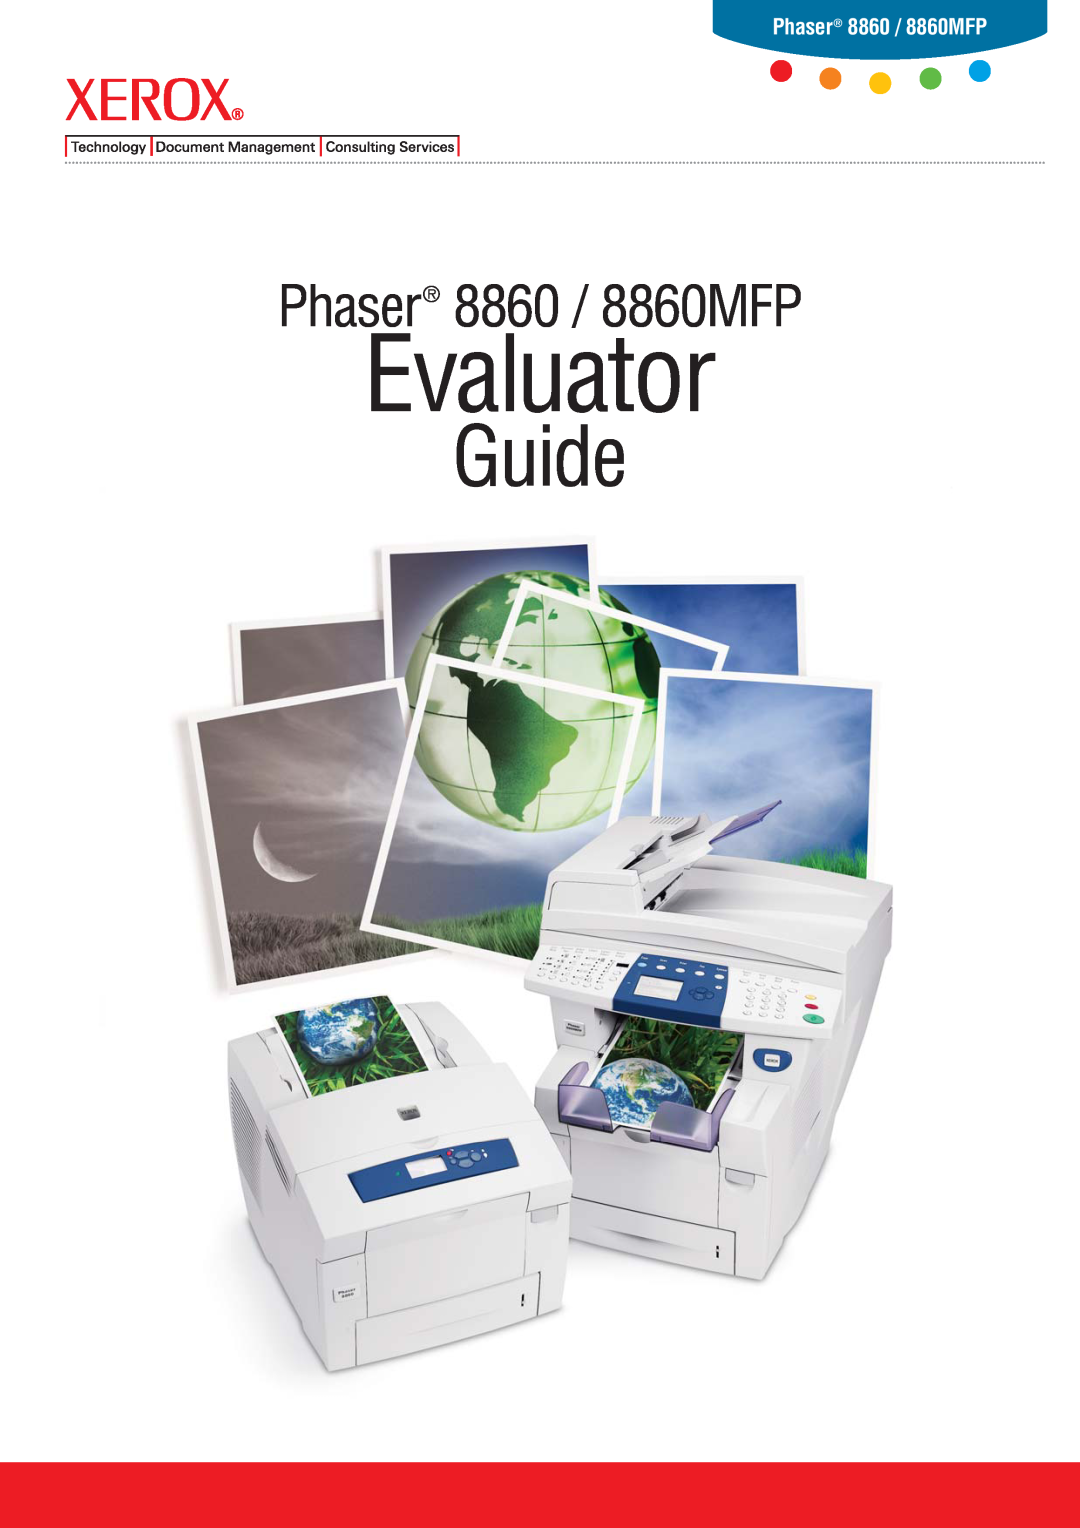 Xerox manual Phaser 8860 / 8860MFP, Evaluator, Guide 